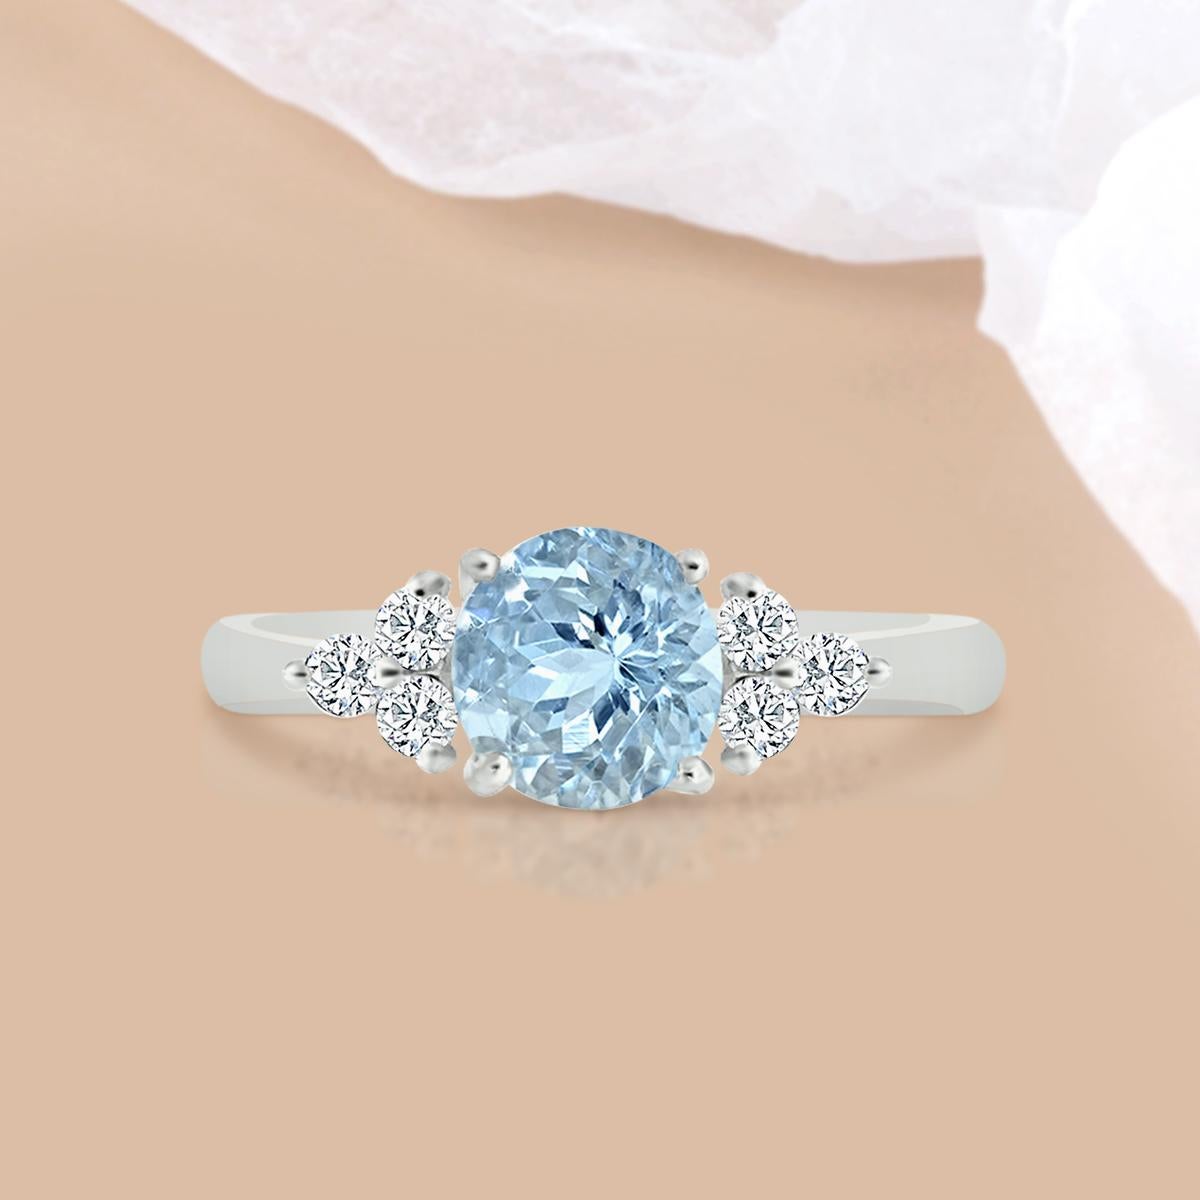 An Aquamarine Ring Is Both Fashionable and Distinctive. 
This Lovely 14K White Gold Round Shaped Aquamarine and Diamond Ring Is in Such Huge Demand.
A 7mm Aquamarine Gemstone Is Giving a Very Classy Look to This Beautiful Ring, Looks Like the